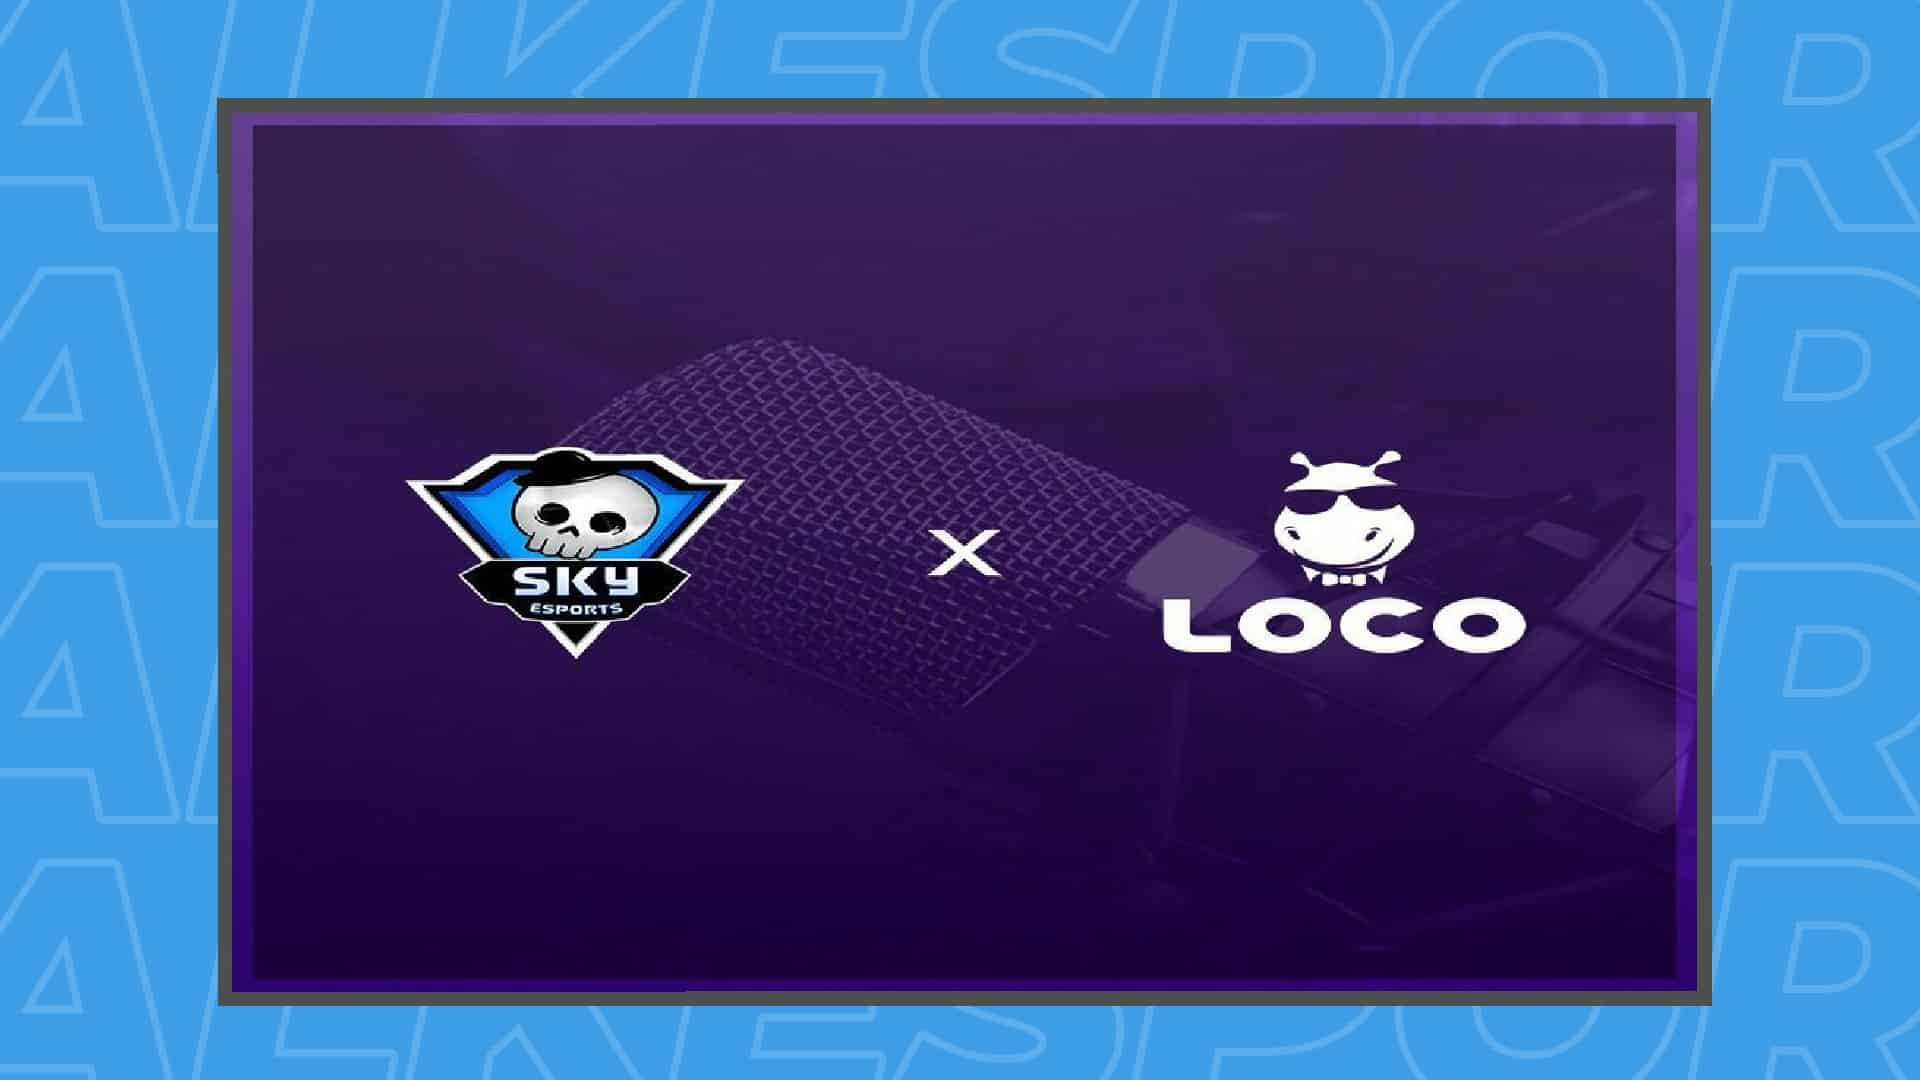 Skyesports and Loco announce Skyesports Championship 2.0 across 5 top game titles » TalkEsport